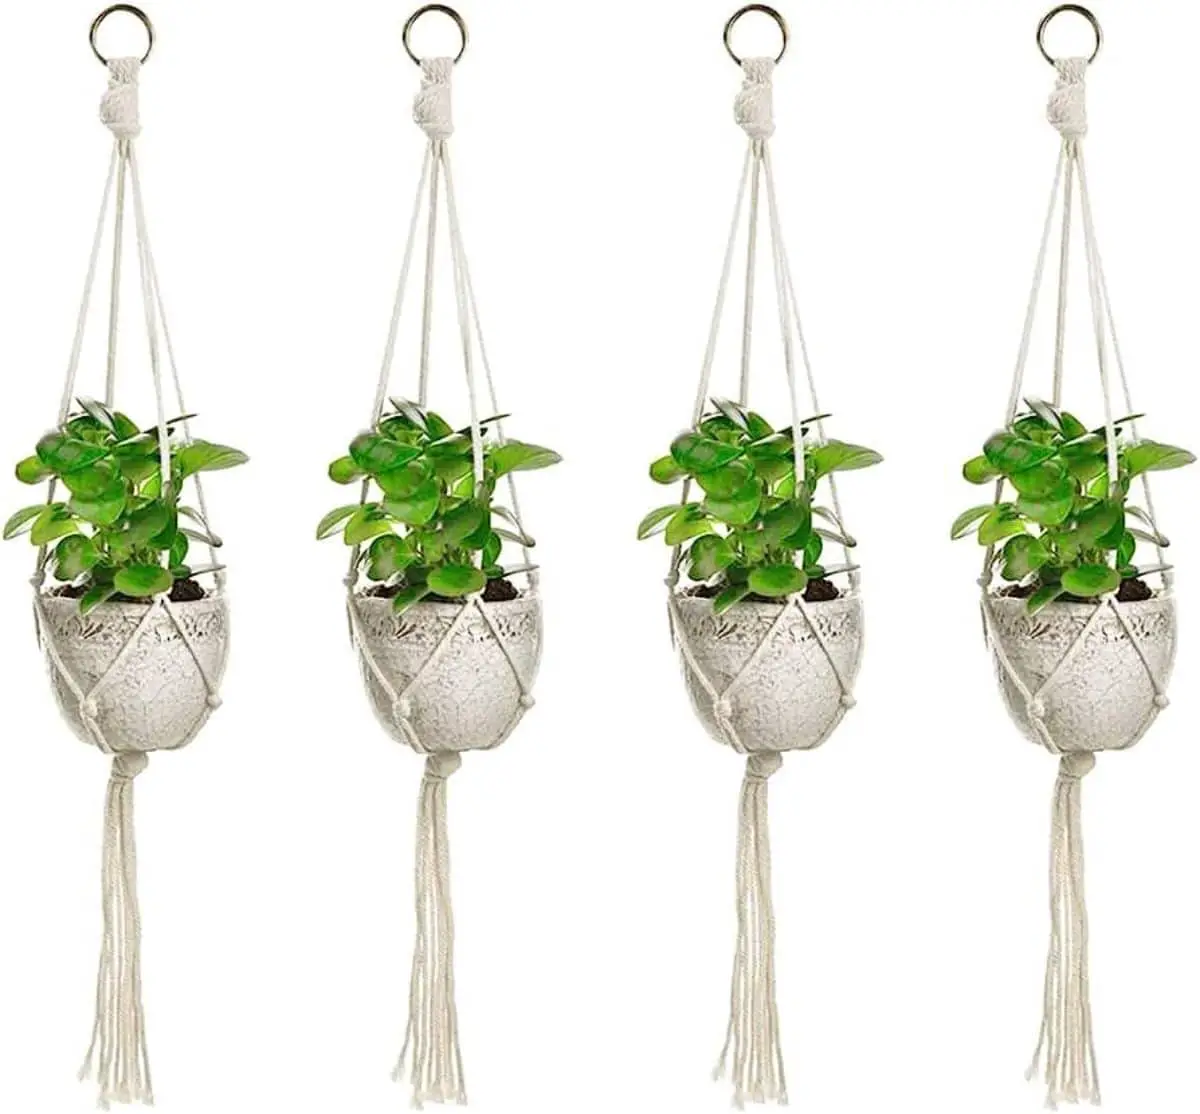 The best hooks for hanging pots you can buy